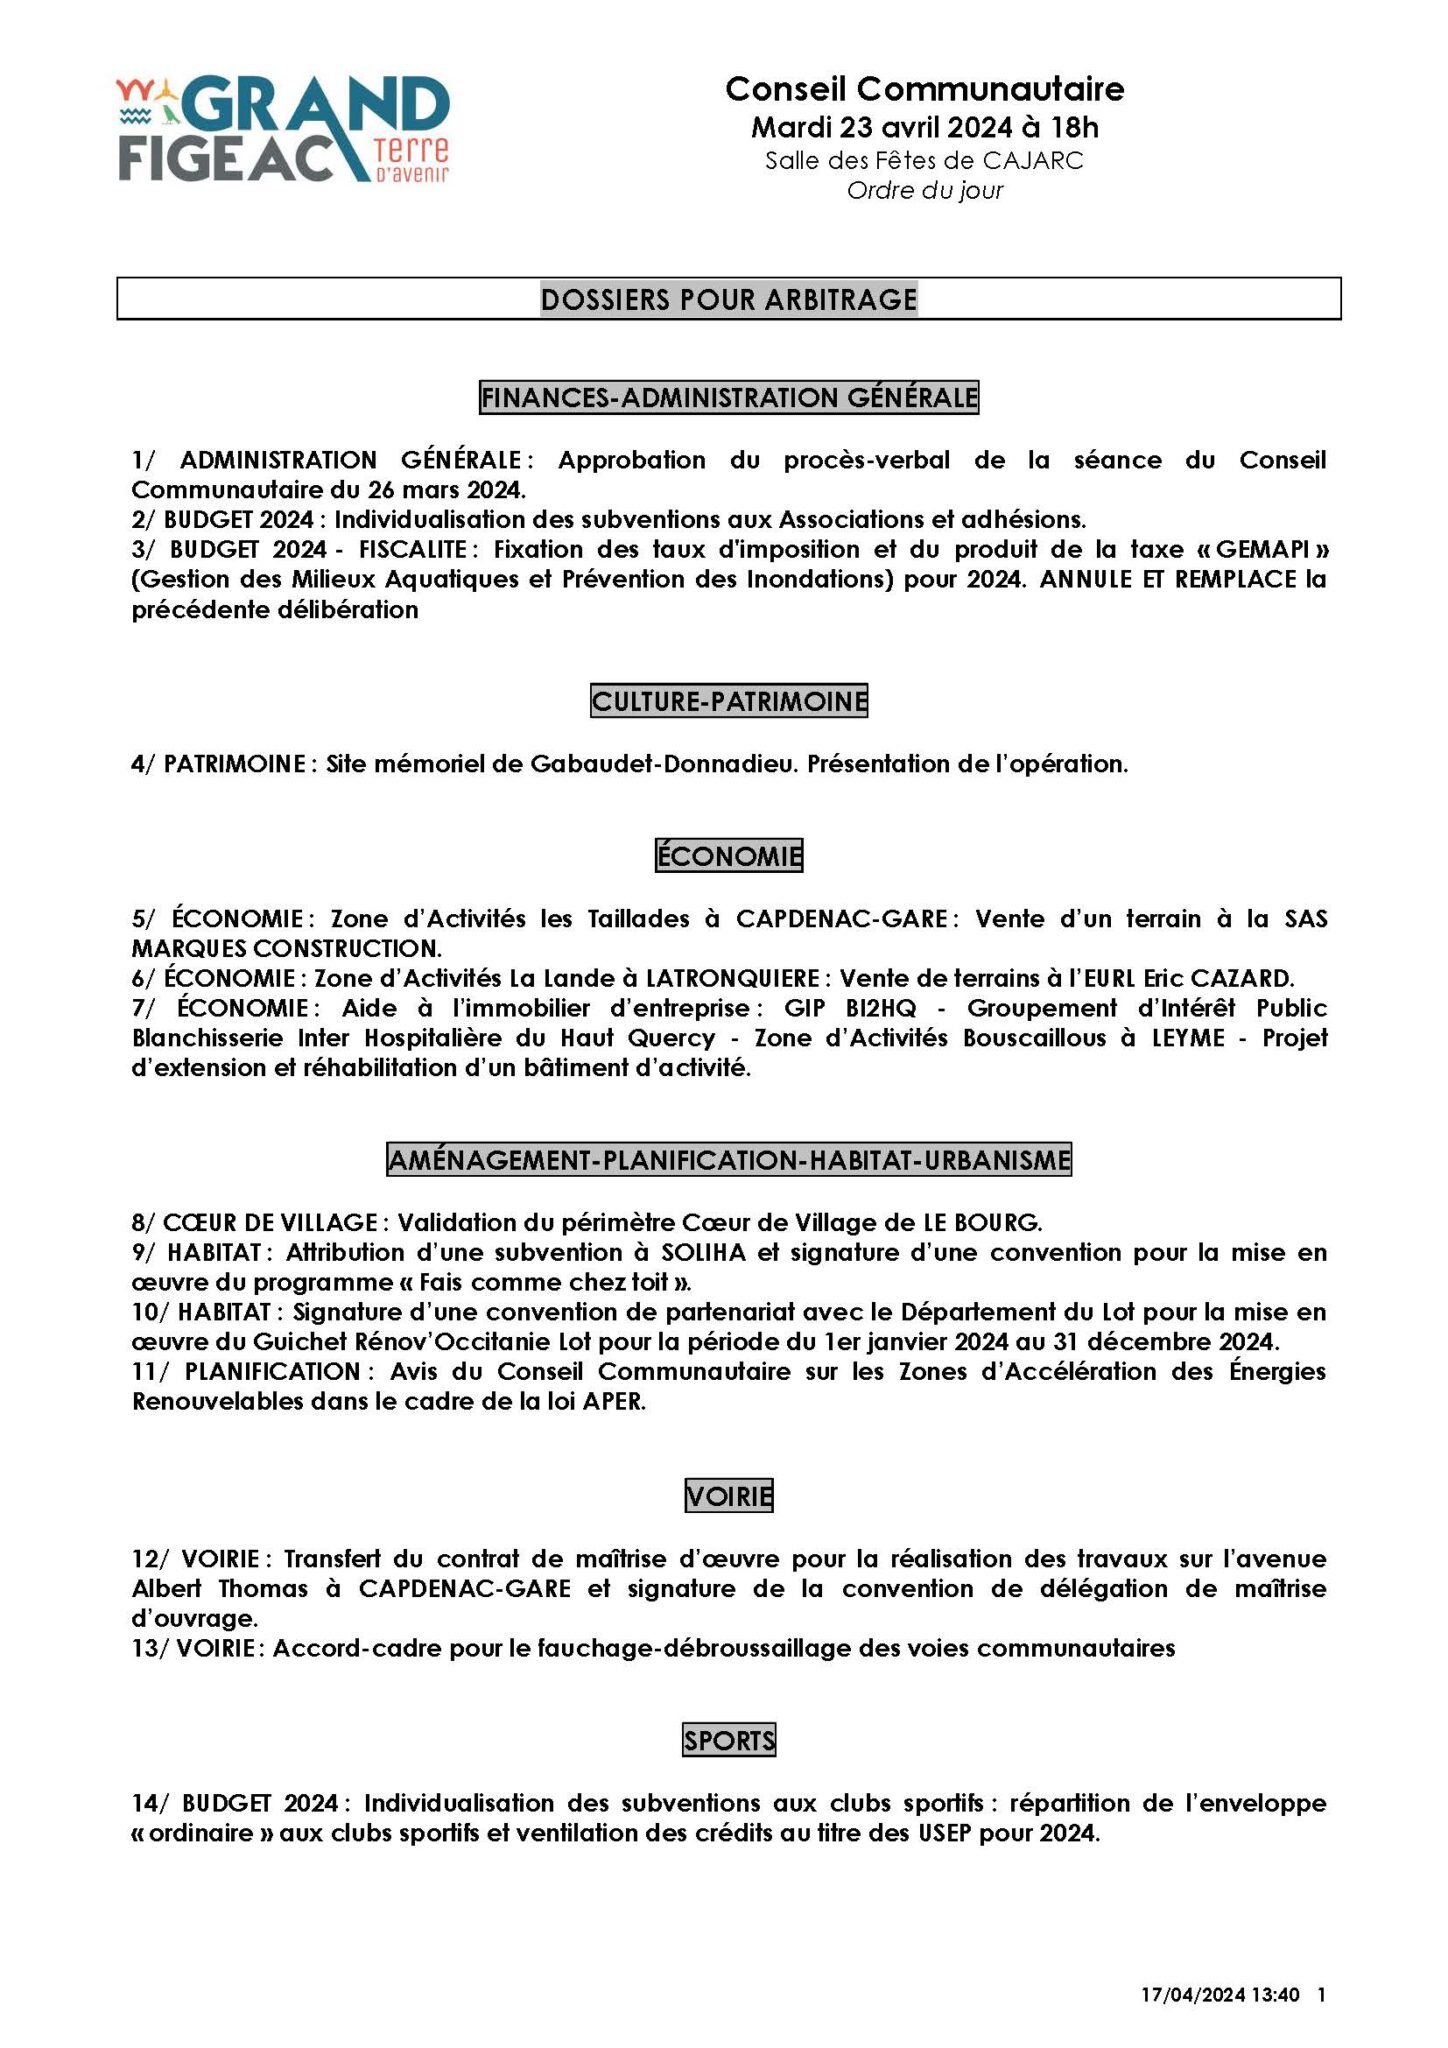 2024-conseil-communautaire-avril-ville-figeac_page_1